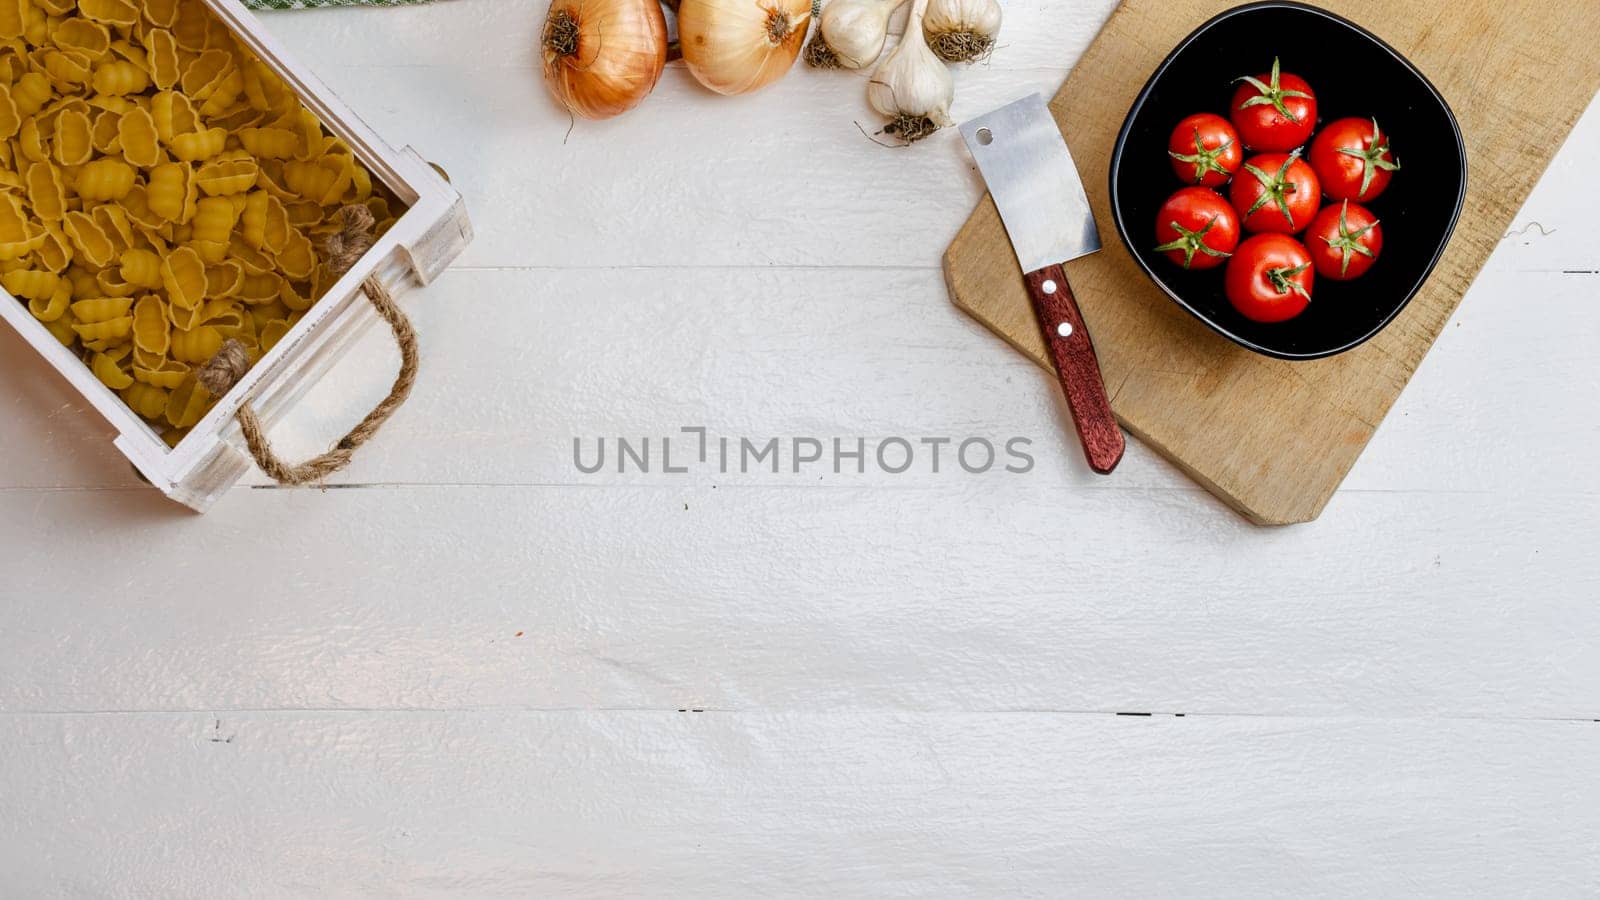 Top view of onions, garlic, pasta in a wooden crate and fresh ripe cherry tomatoes on a rustic white wooden table. Ingredients and food concept by vladispas